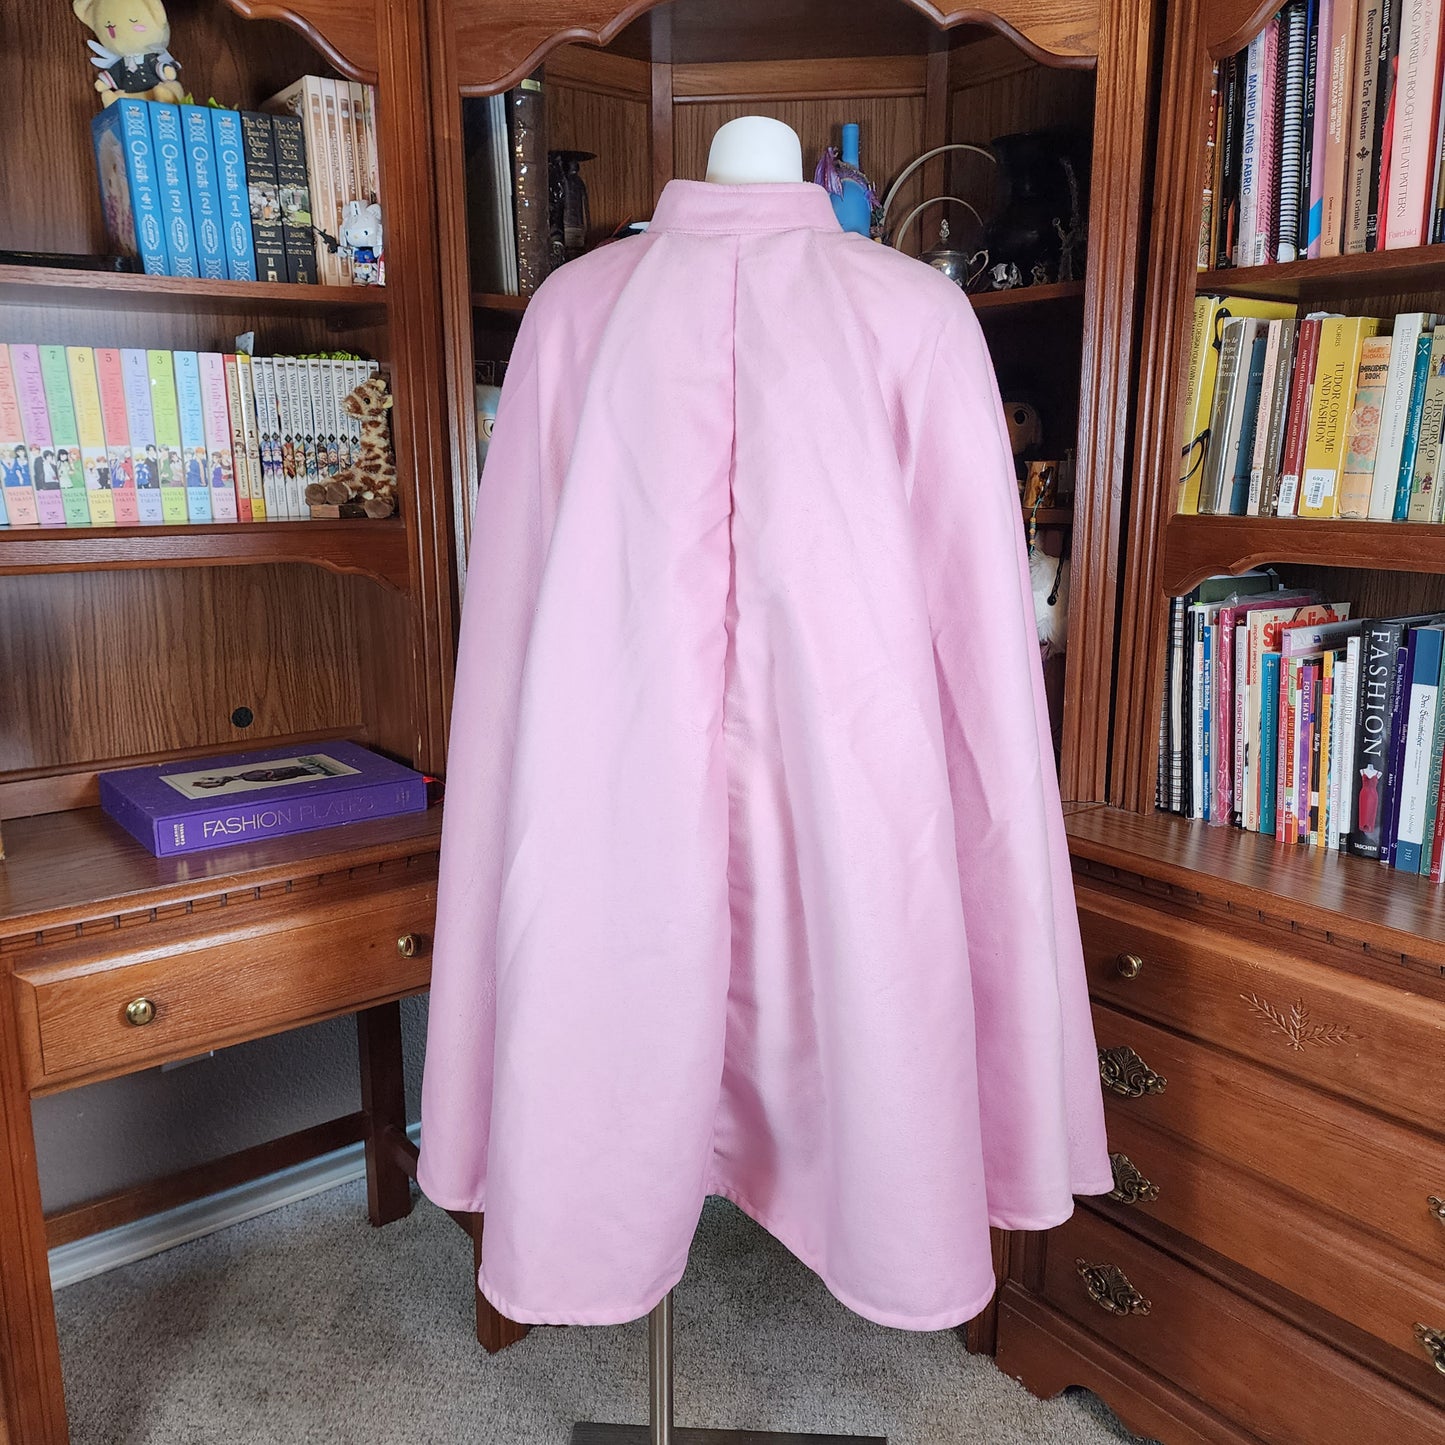 Market Day Cape- Powder Pink Mid-Length Cape with Collar and Arm Slits